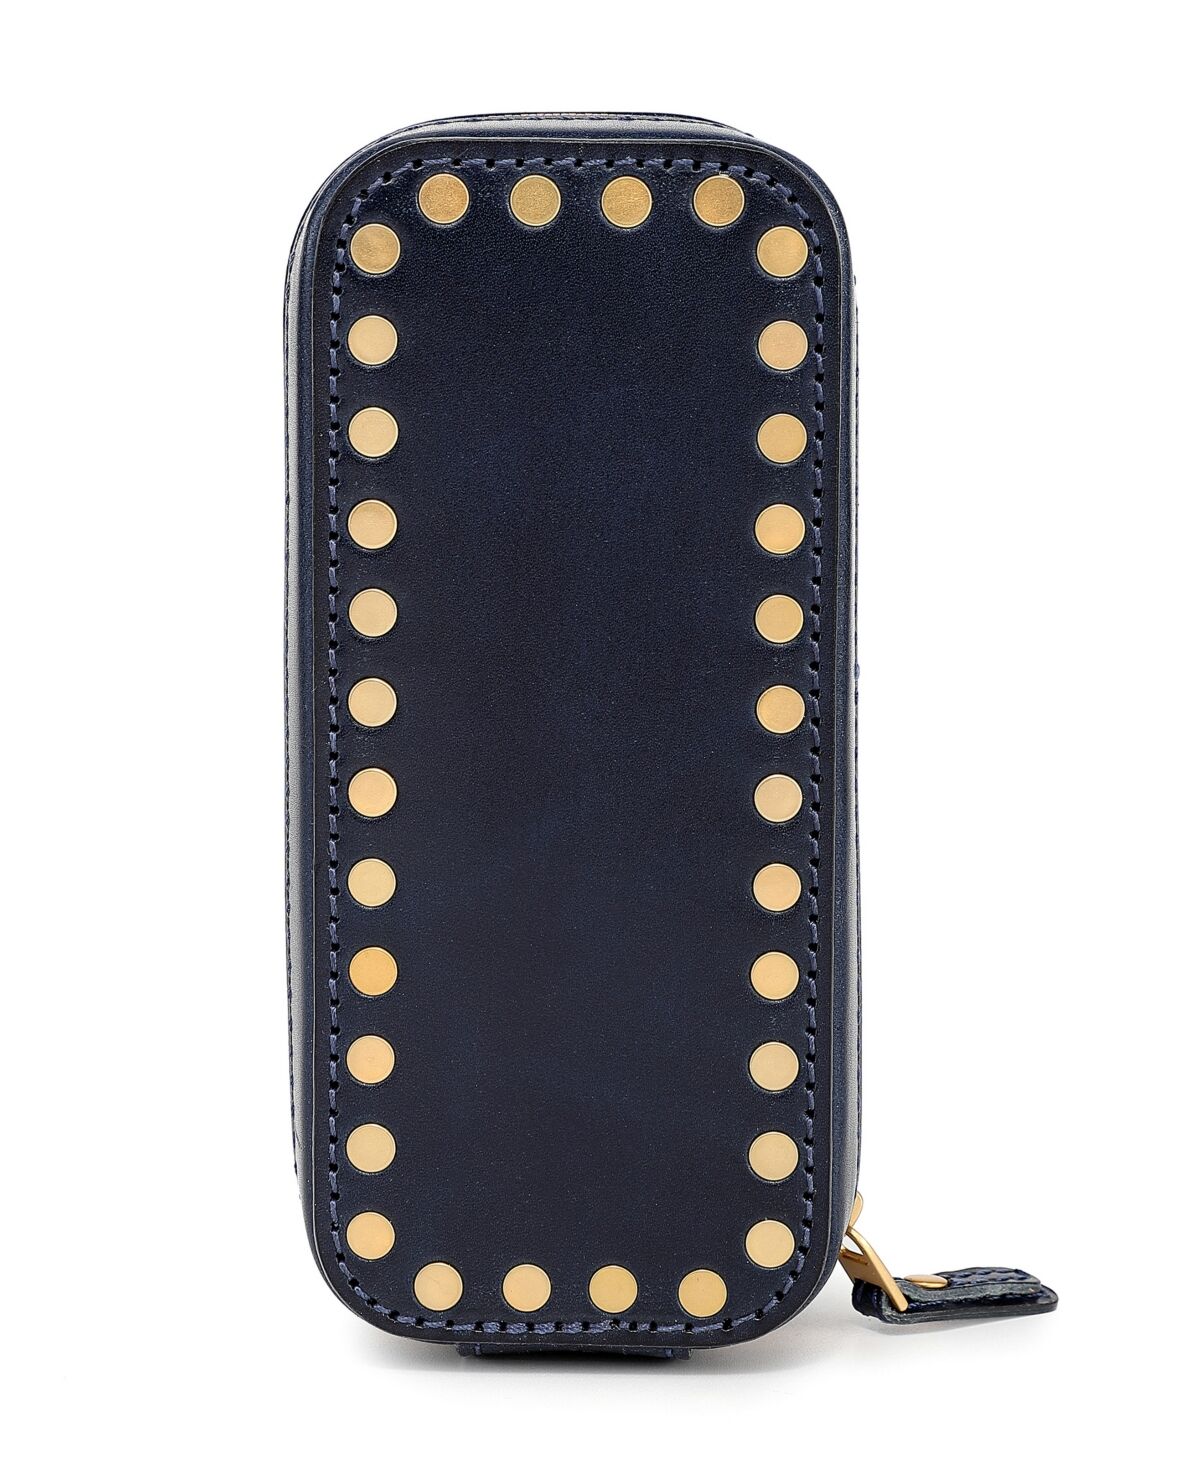 Old Trend Leather Jewelry Box - Oblong - Navy